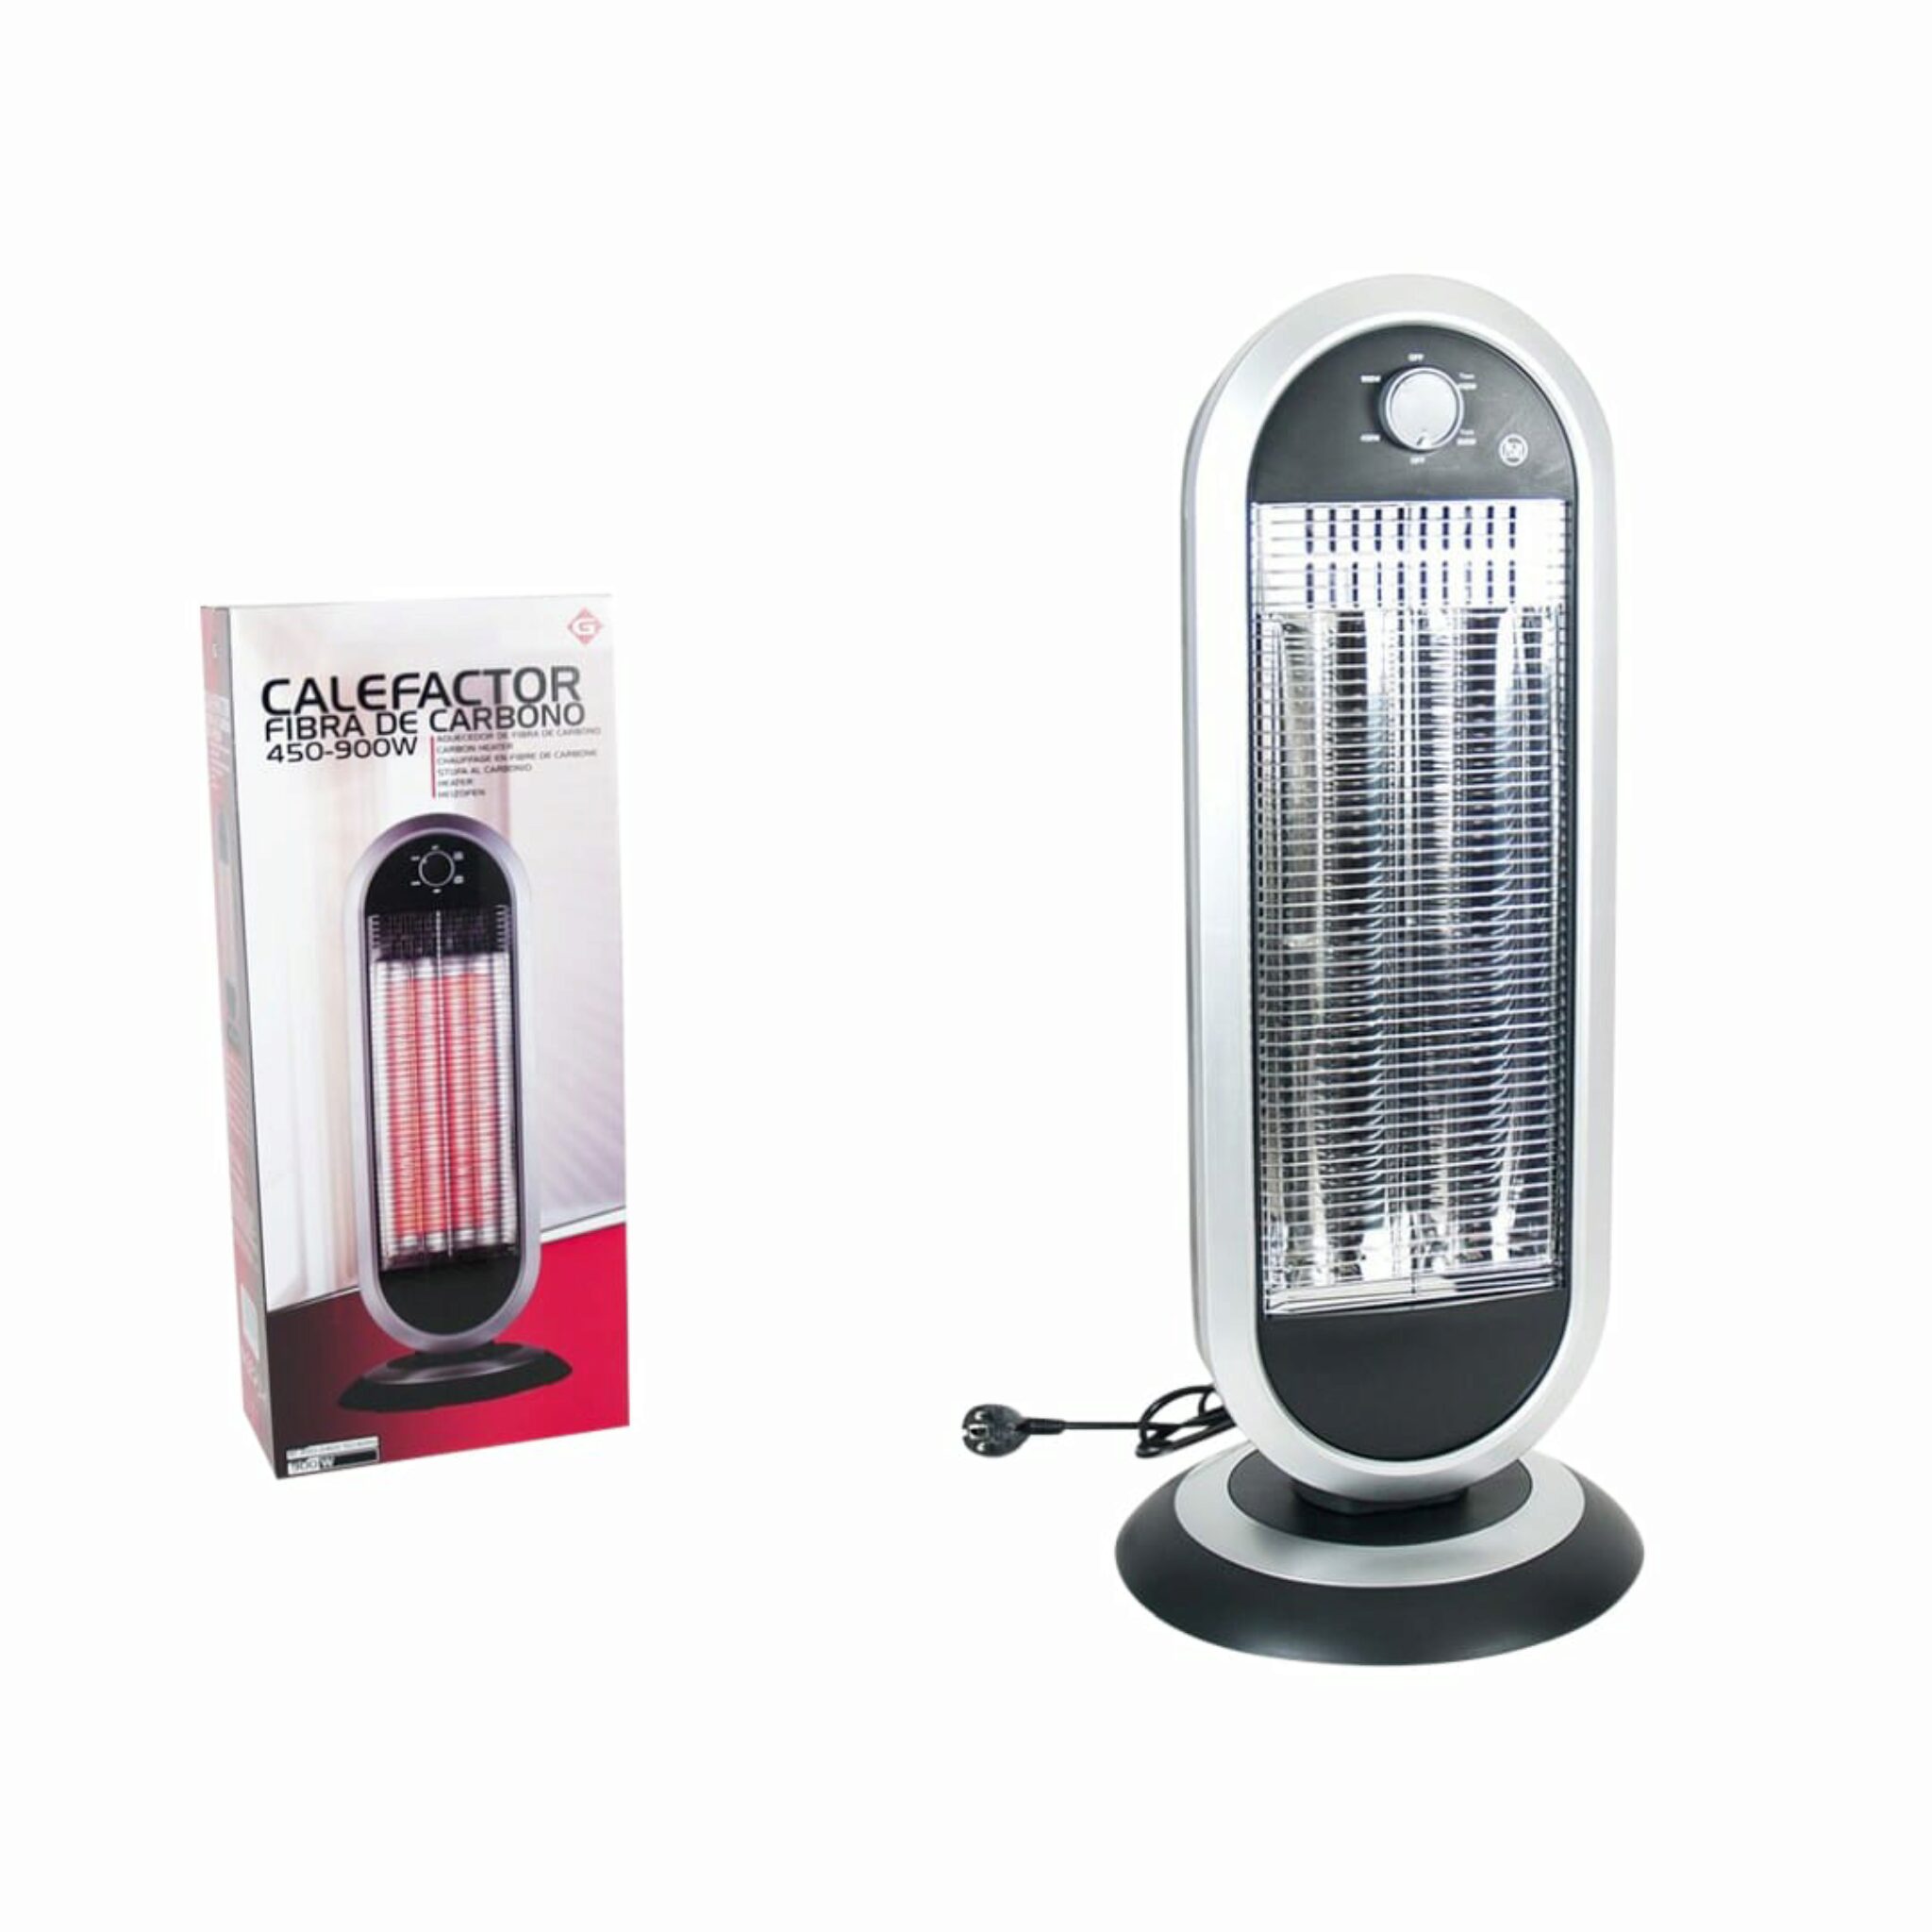 Mr. Heater Portable Buddy Radiant Heater Review